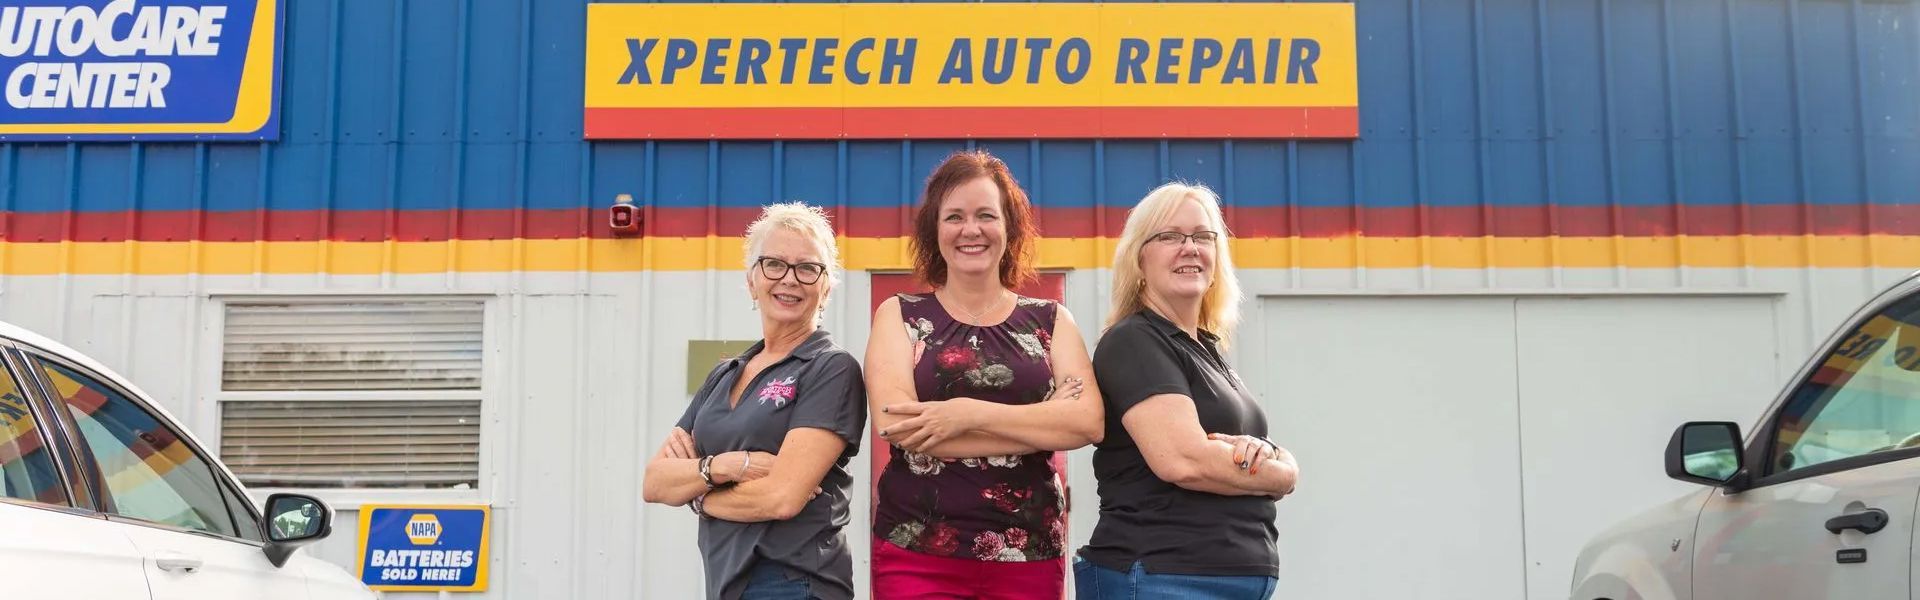 Xpertech Auto Repair, Inc. - the Owners